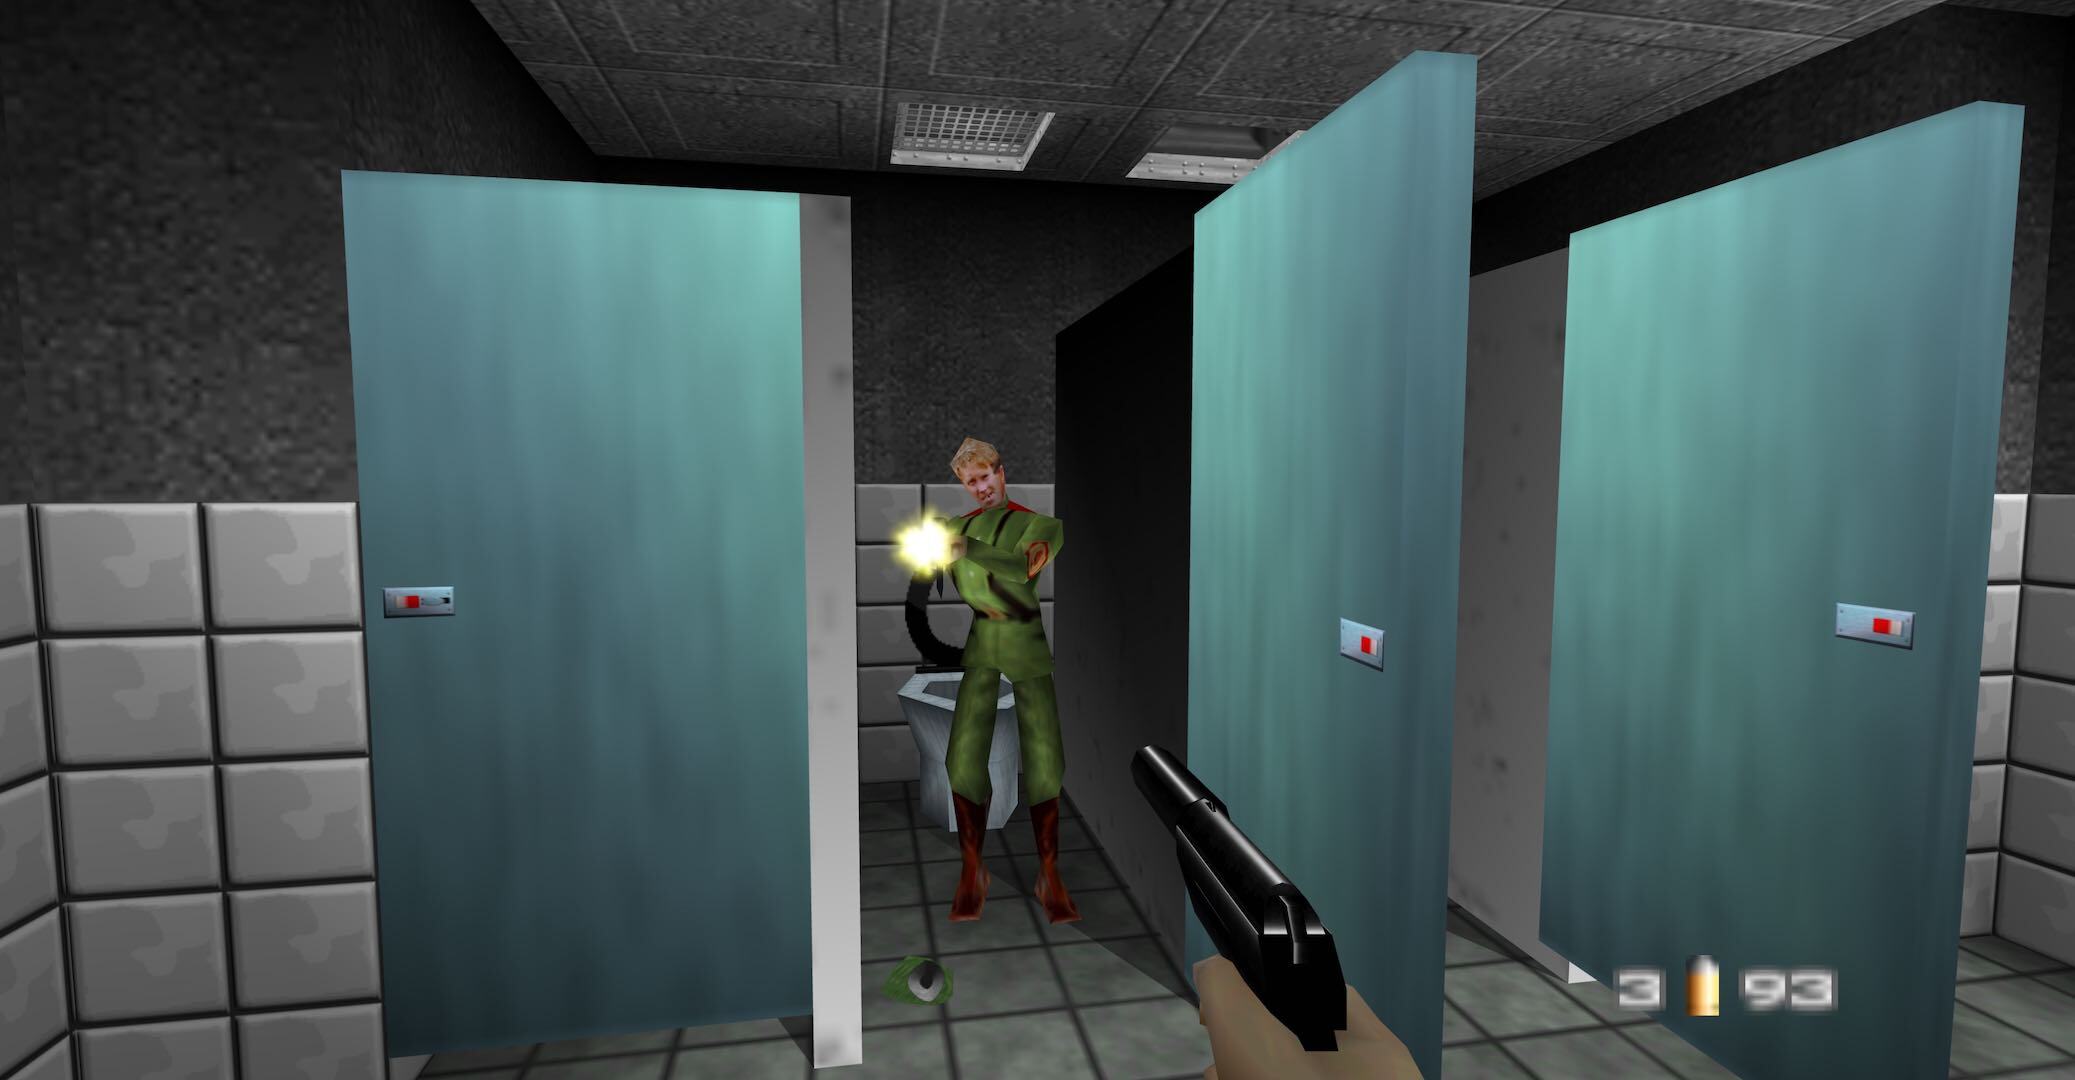 GoldenEye 007 for Xbox Series, Xbox One, and Switch launches